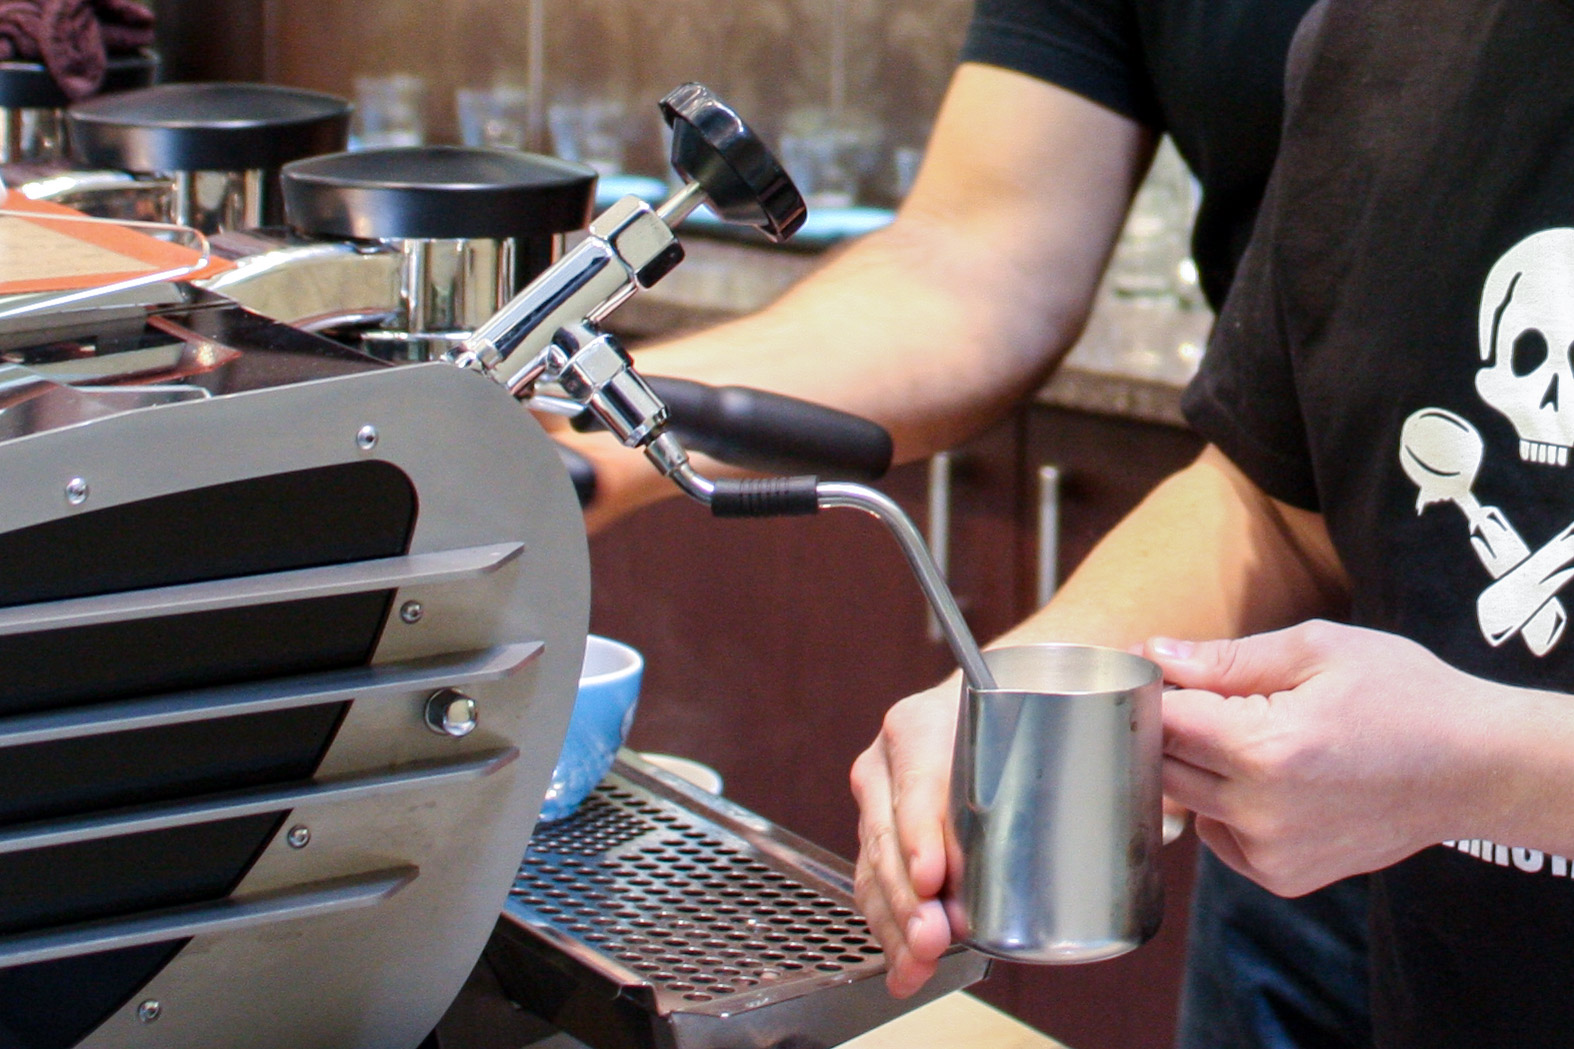 How To Steam Milk With An Espresso Machine - Baked, Brewed, Beautiful